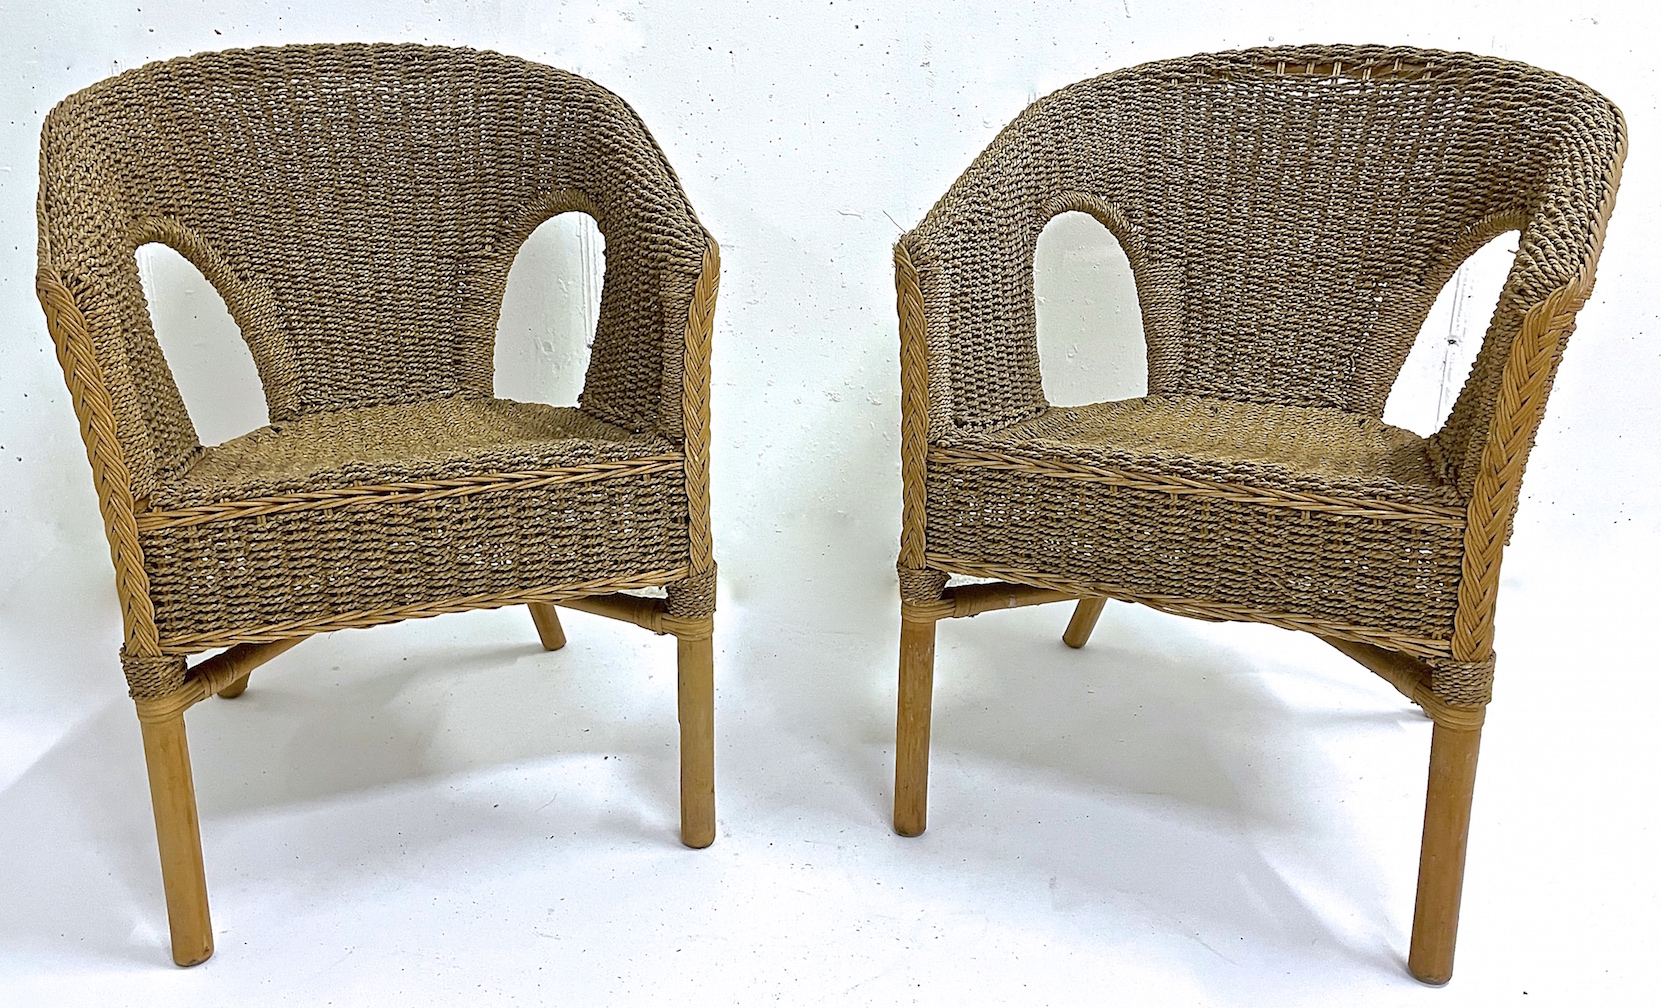 Woven Seagrass & Bamboo Chairs, PR~P77660916